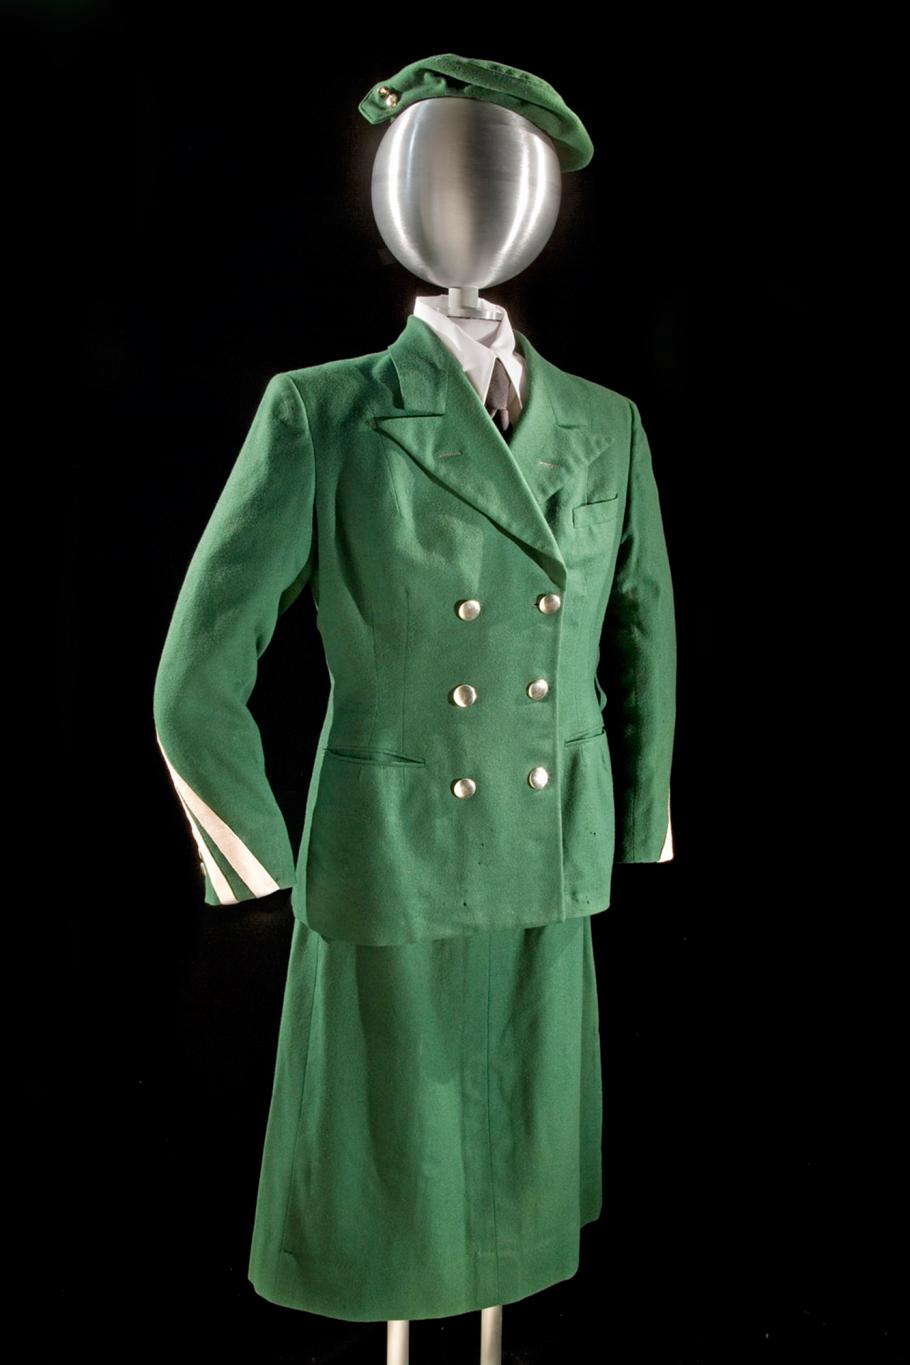 Front view of green stewardess uniform with green jacket with three pockets and six brass buttons, a green stewardess cap, and green skirt. White scarf worn on neck. Styled on mannequin.